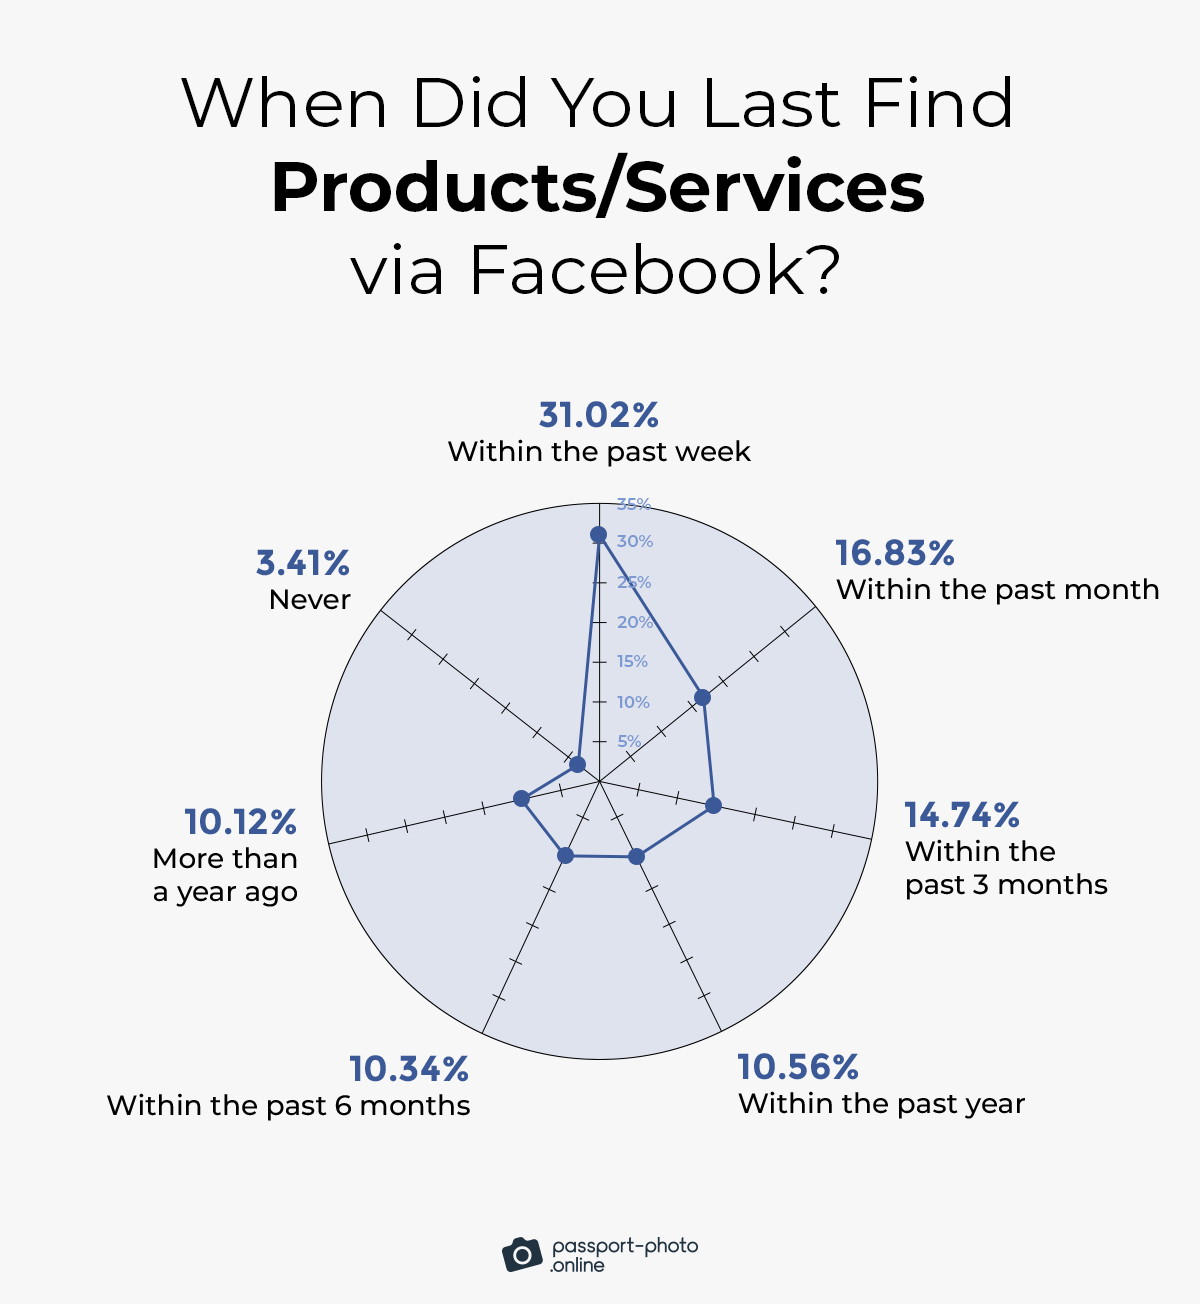 63% of Facebook social networkers have found products/services on the platform in the past three months